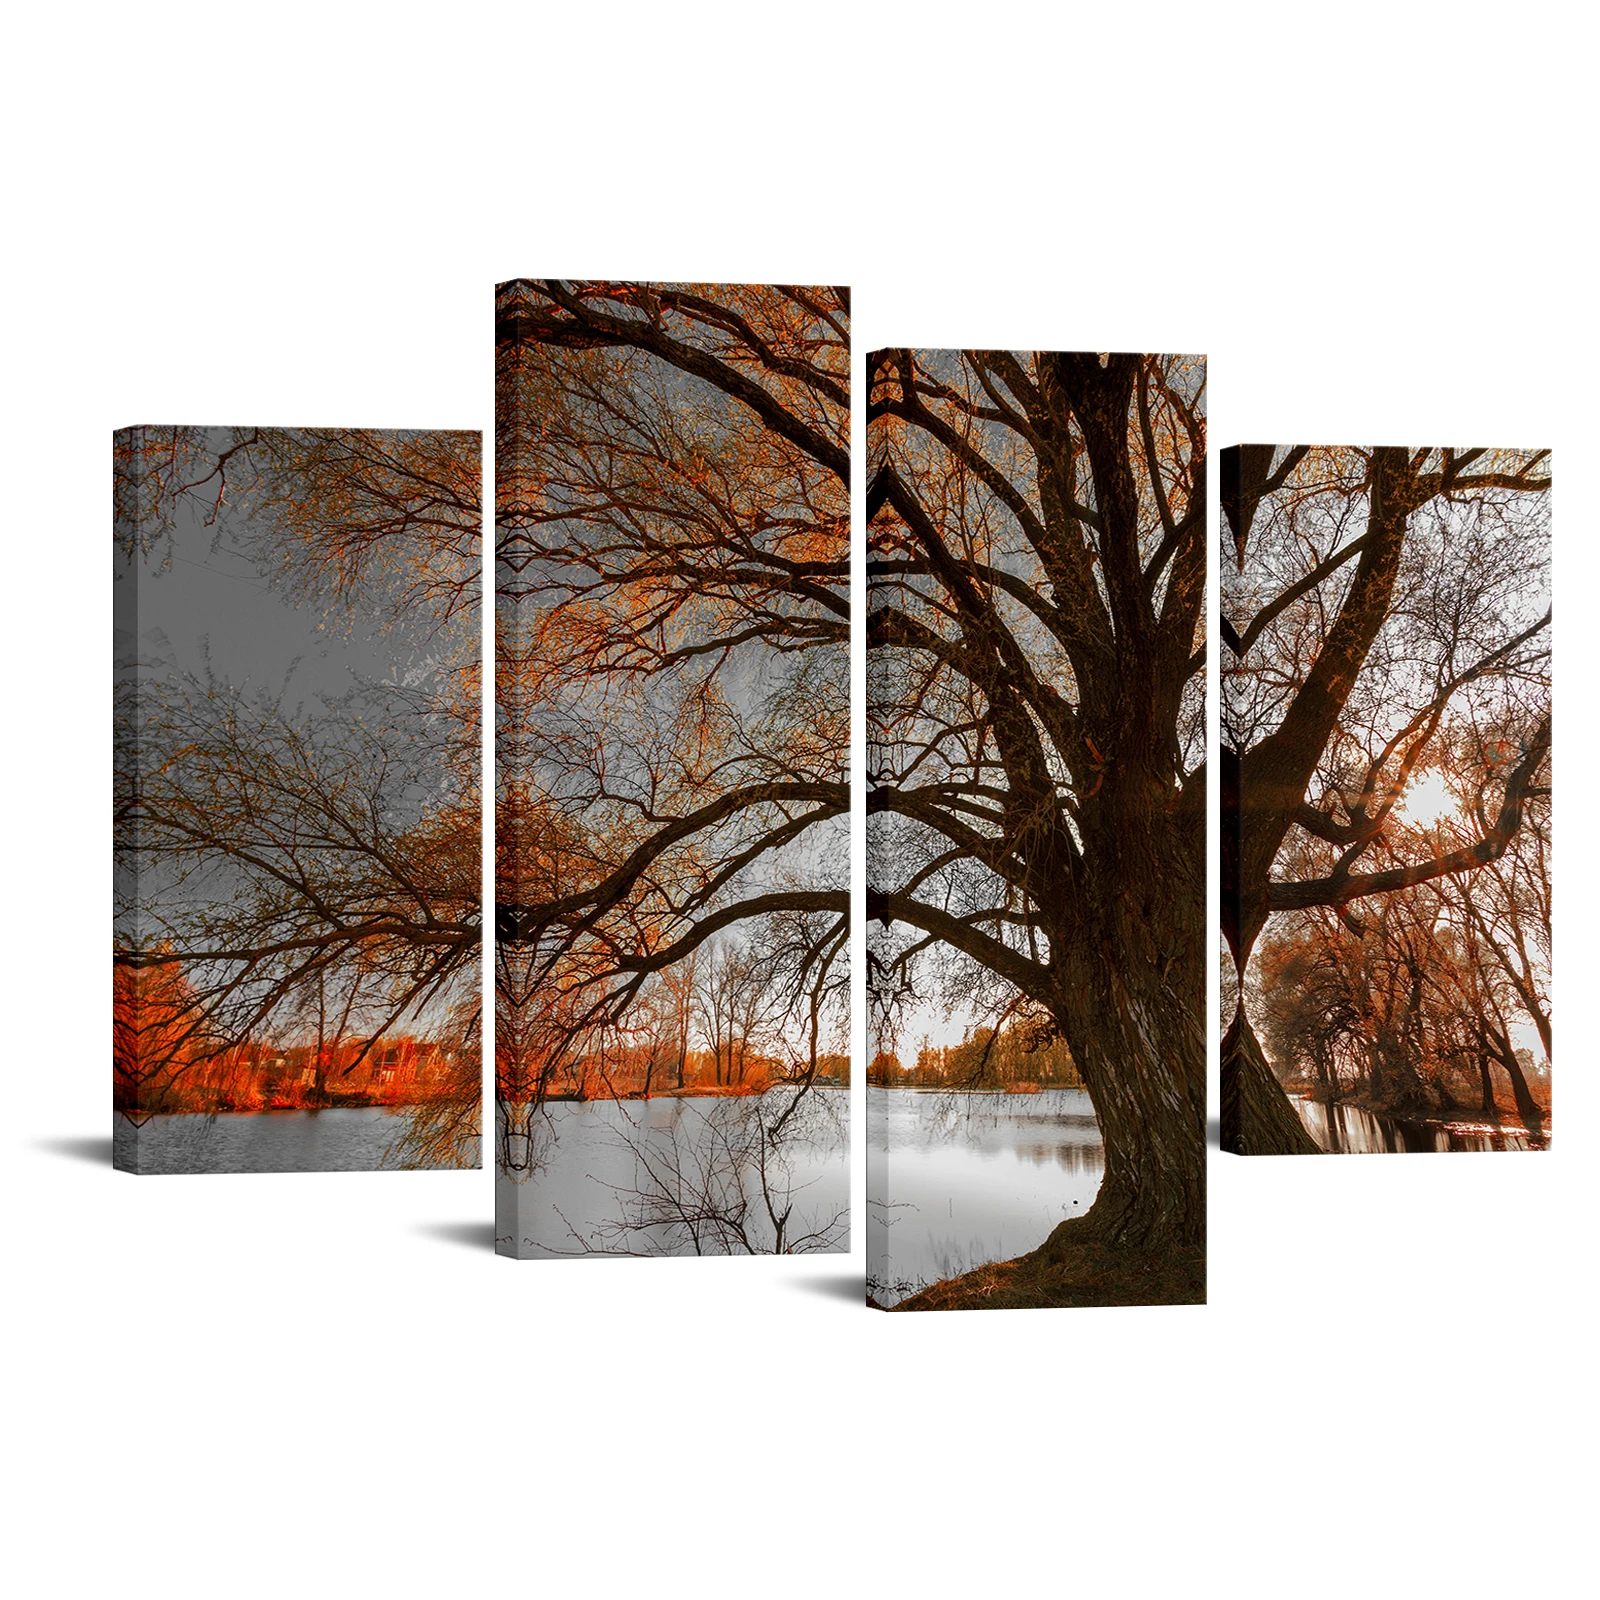 

4 Pieces Tree By The Lake Poster Home Decor Lake Landscape Print Canvas Painting Modern Style Pictures Living Room Wall Art